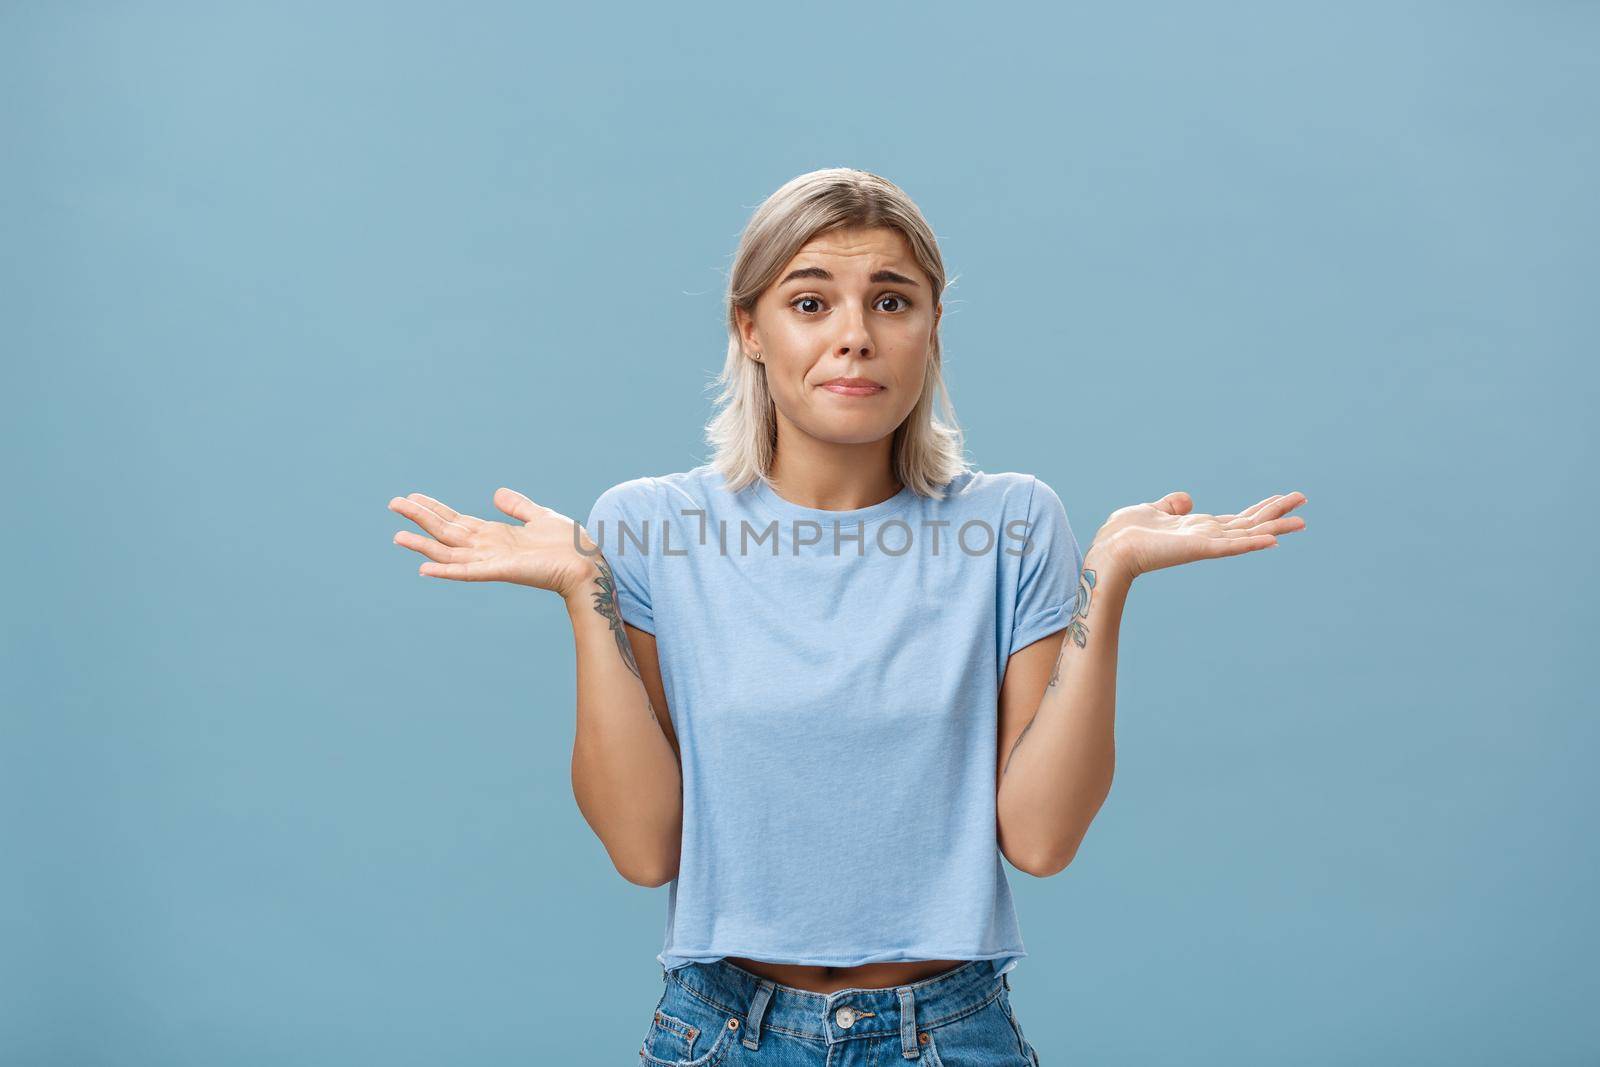 No idea how help sorry. Portrait of unsure gloomy girlfriend feeling regret shrugging with hands near shoulders frowning and pursing lips being uncertain and unaware over blue background. Body language concept